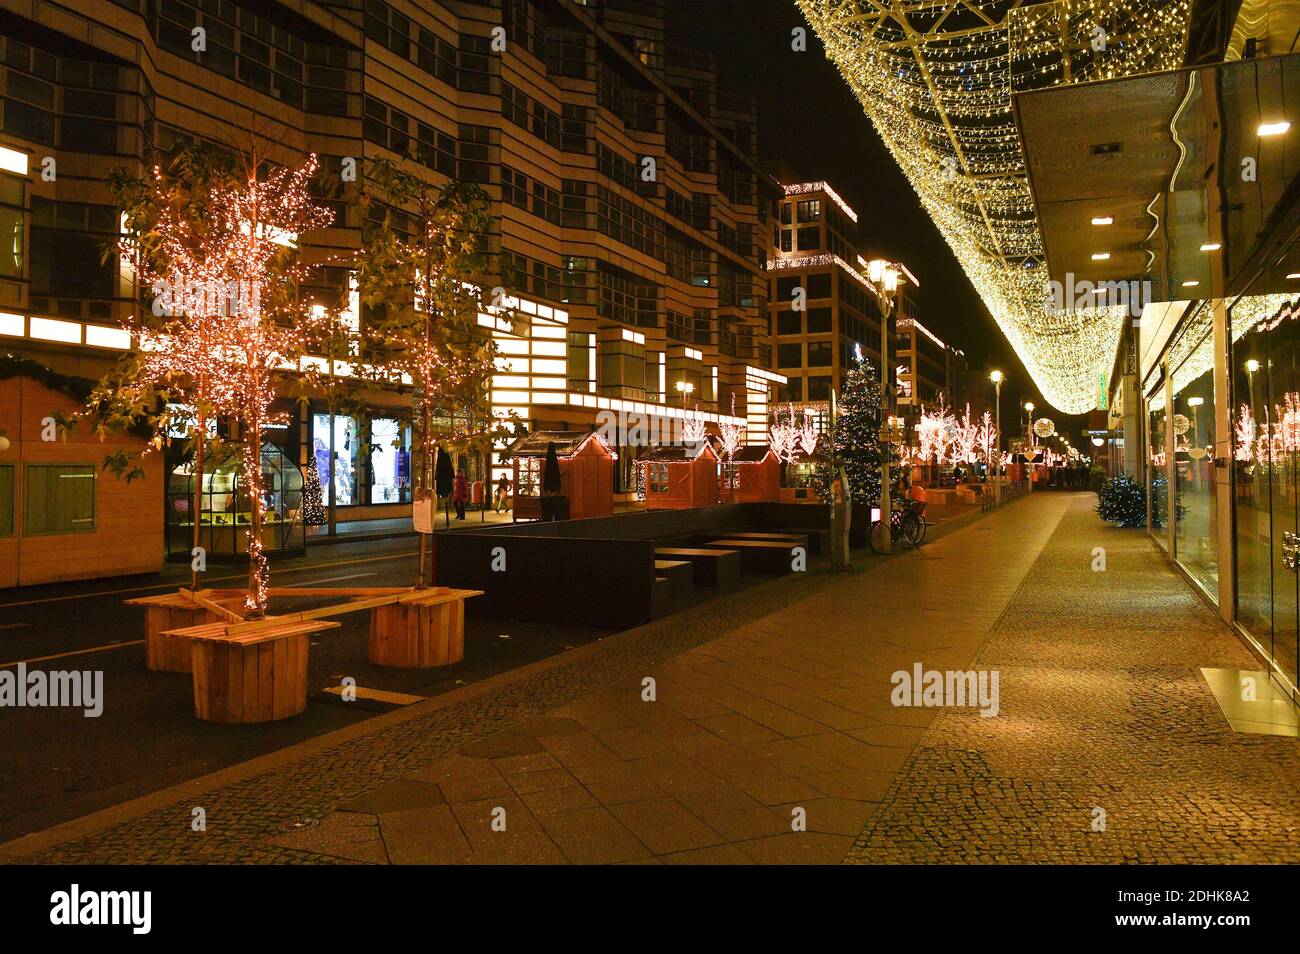 As an alternative to the canceled Weihaftertsmarkets, there are individual stands this year with Weihaftertsschmuck and offers such as mulled wine, almonds and bratwurst, here in the car-free part of Friedrichstrasse. Berlin, December 10th, 2020 | usage worldwide Stock Photo